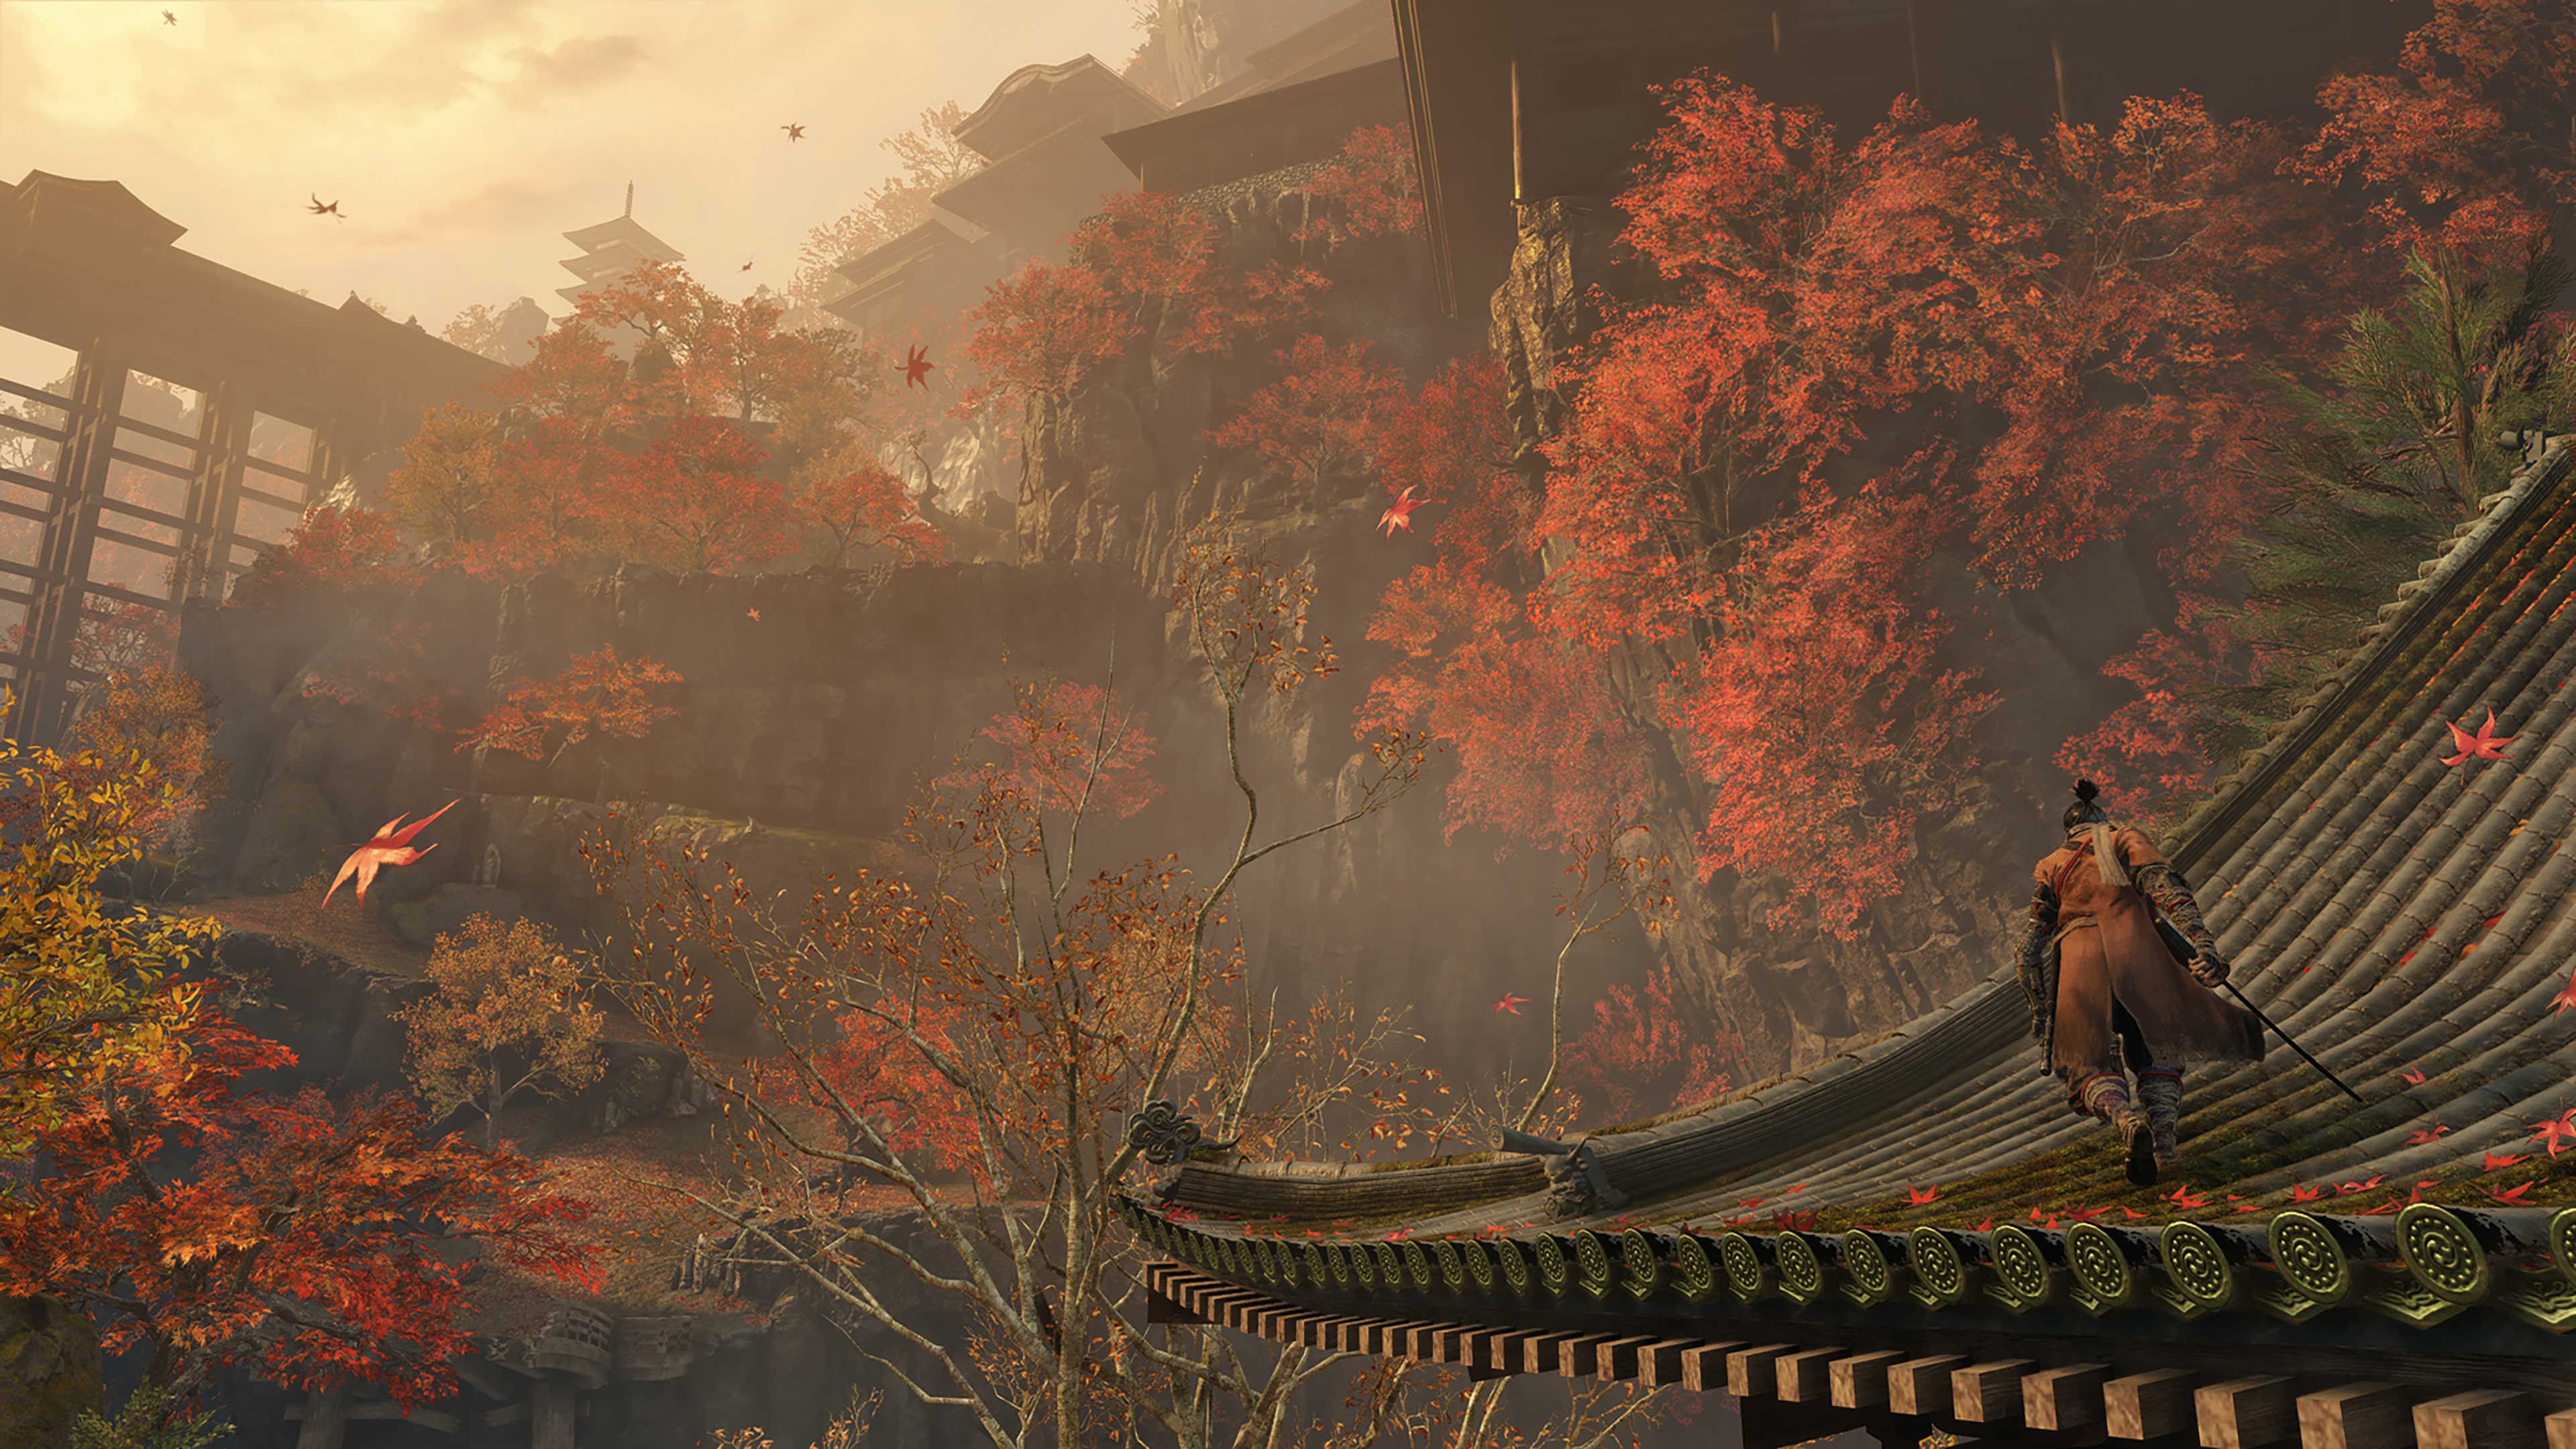 Sekiro Shadows Die Twice Game Of The Year Edition